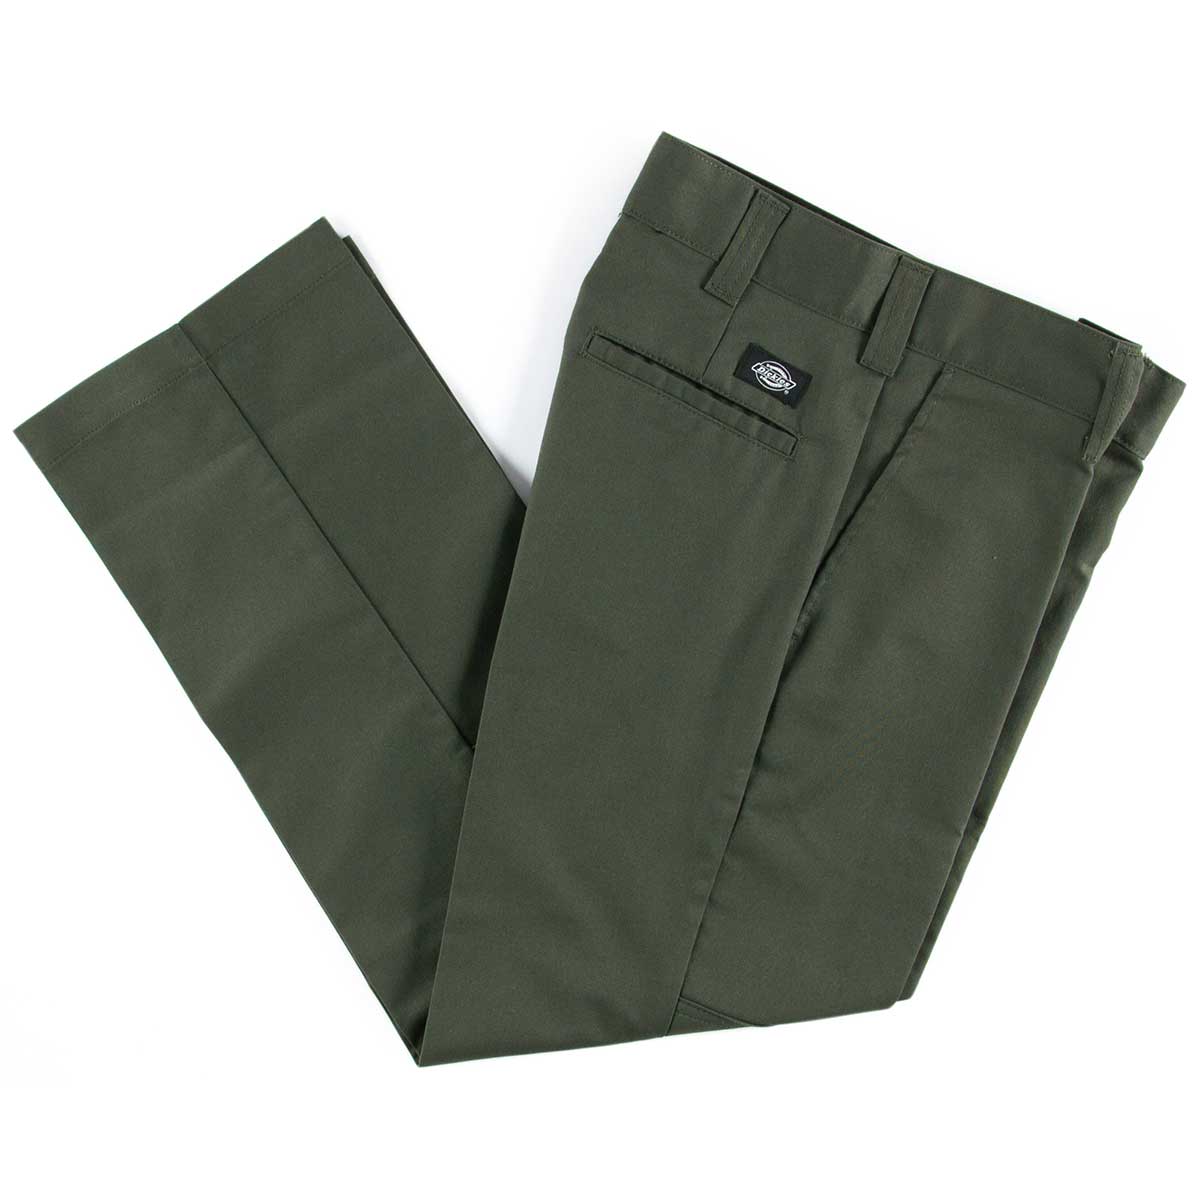 Women's Double-Knee Pant - Relaxed Fit - Rugged Flex® - Twill